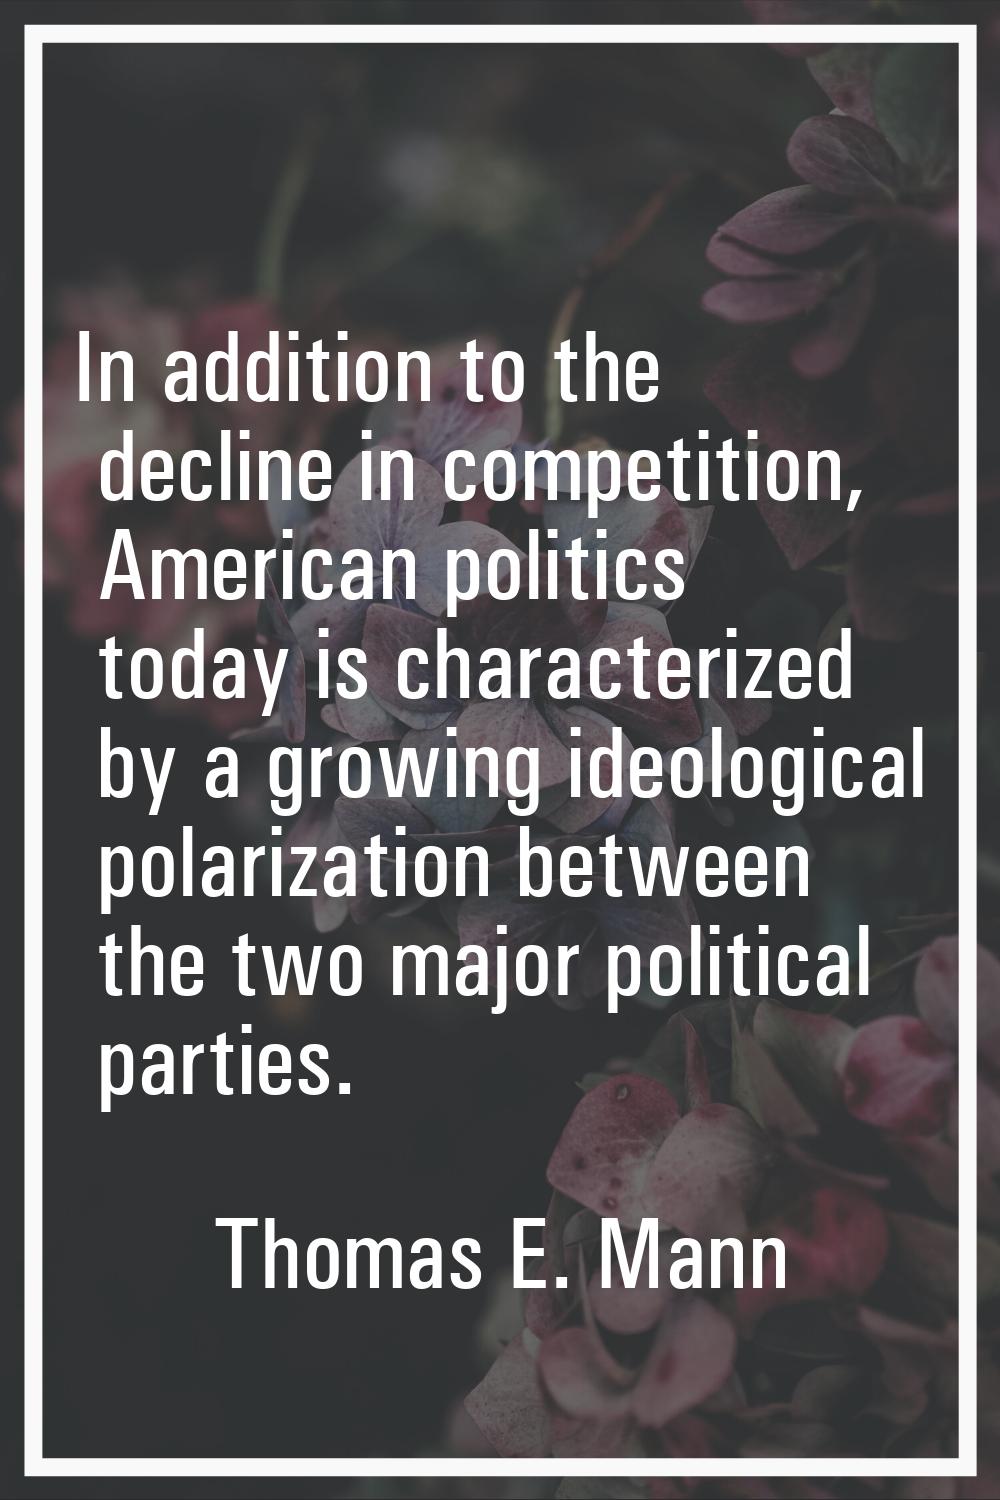 In addition to the decline in competition, American politics today is characterized by a growing id